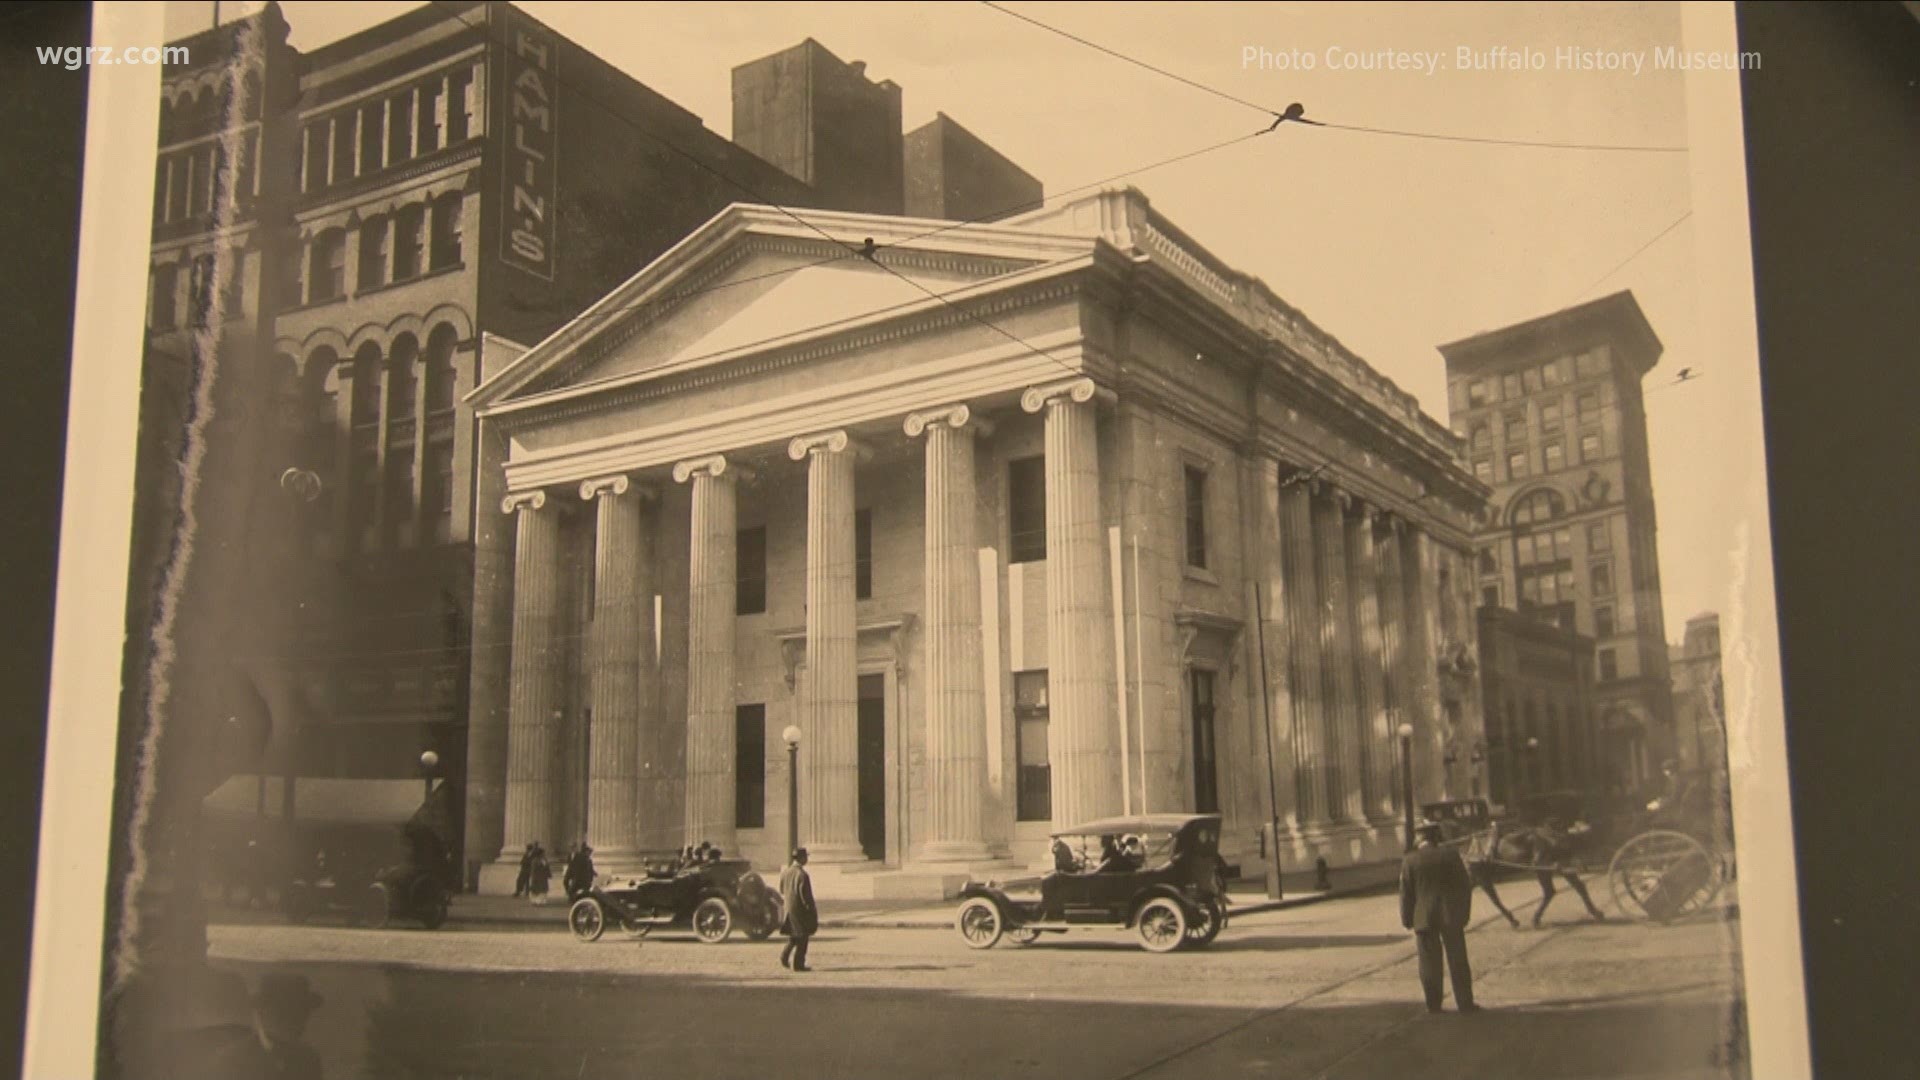 Unknown Stories of WNY: Buffalo's Marble Temple